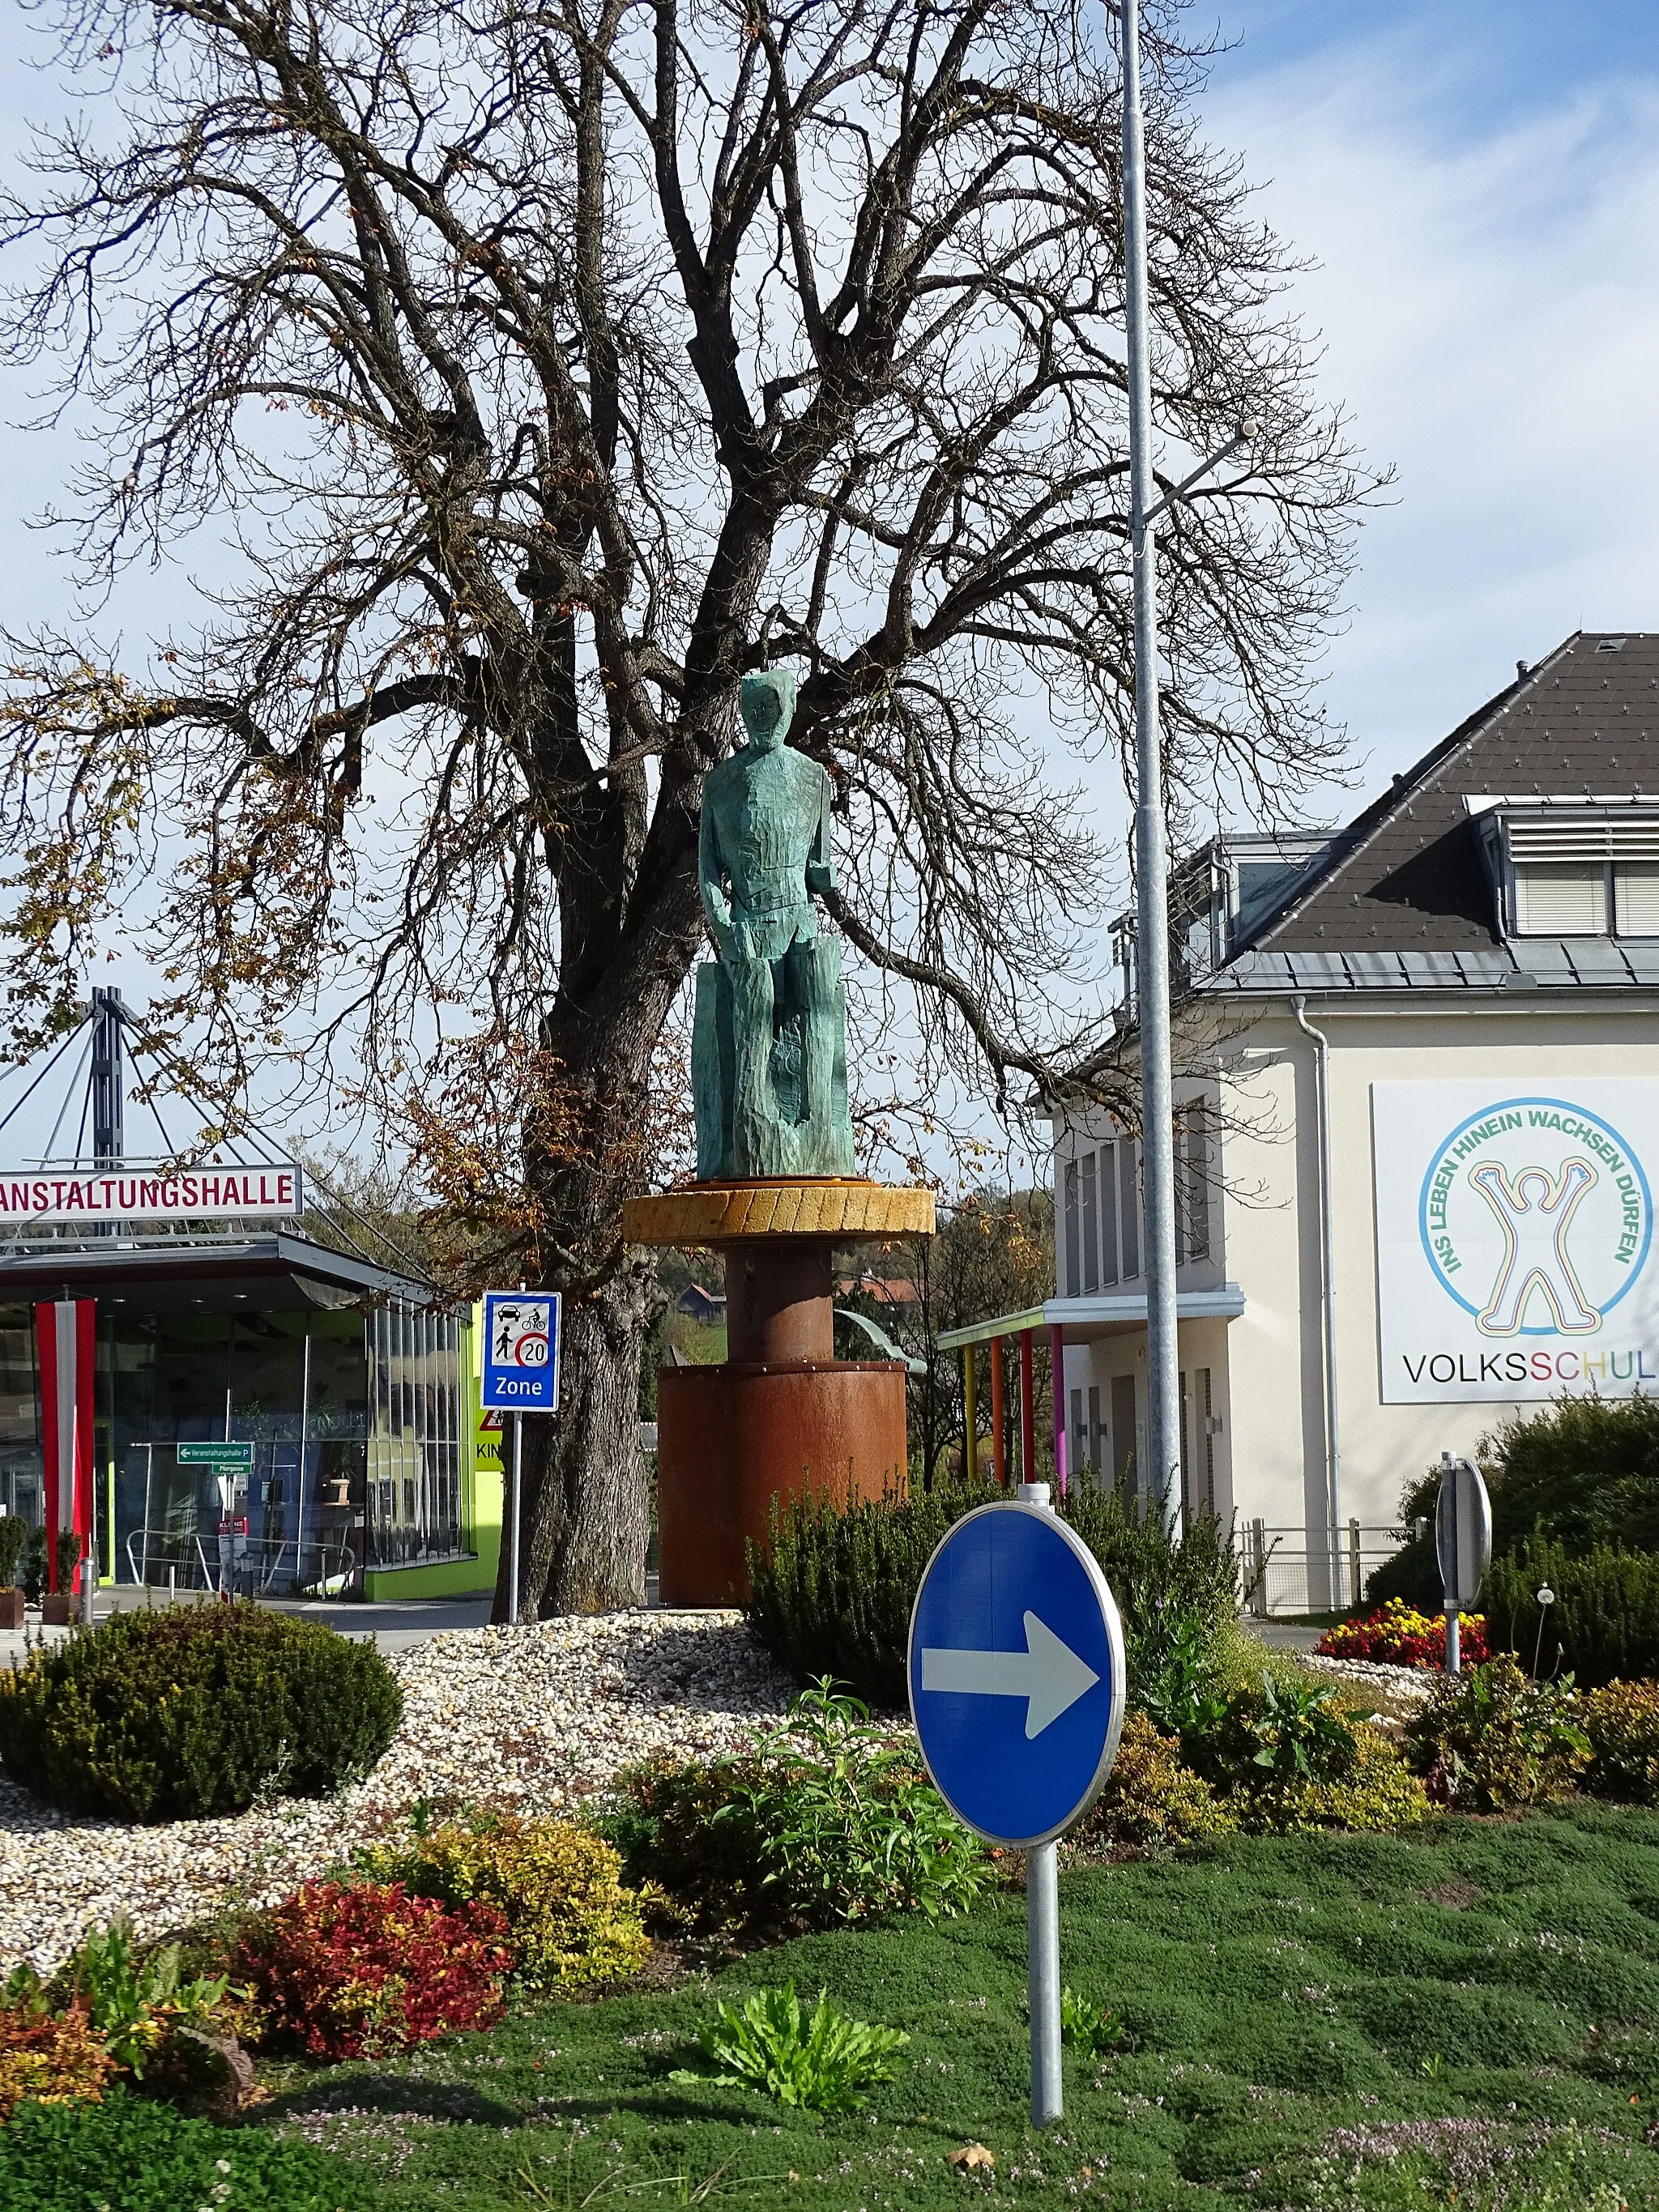 Photo showing: The figure "Liubócha", made by Gerald Brettschuh, in a roundabout in Lieboch